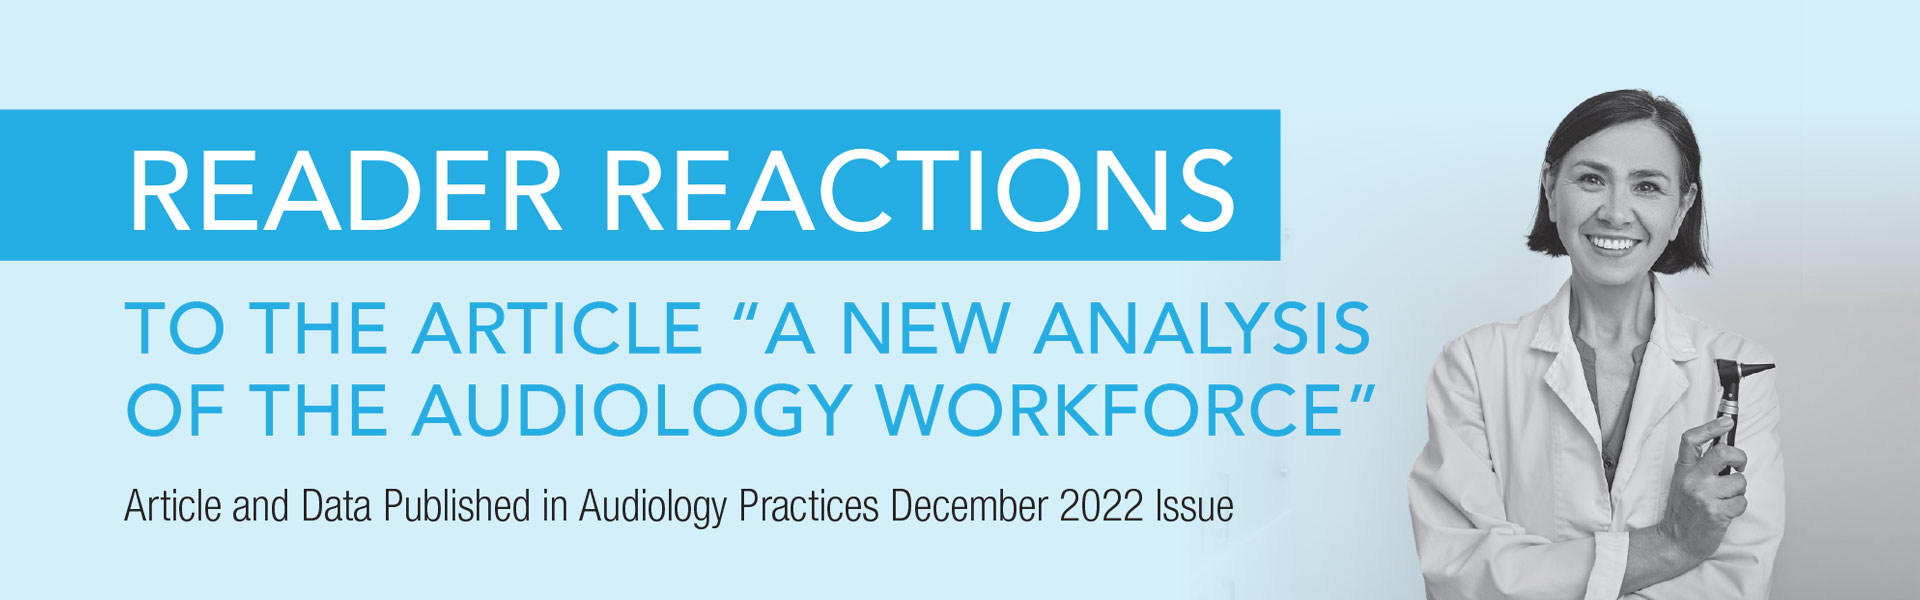 Reader Reactions to the Article "A New Analysis of the Audiology Workforce"